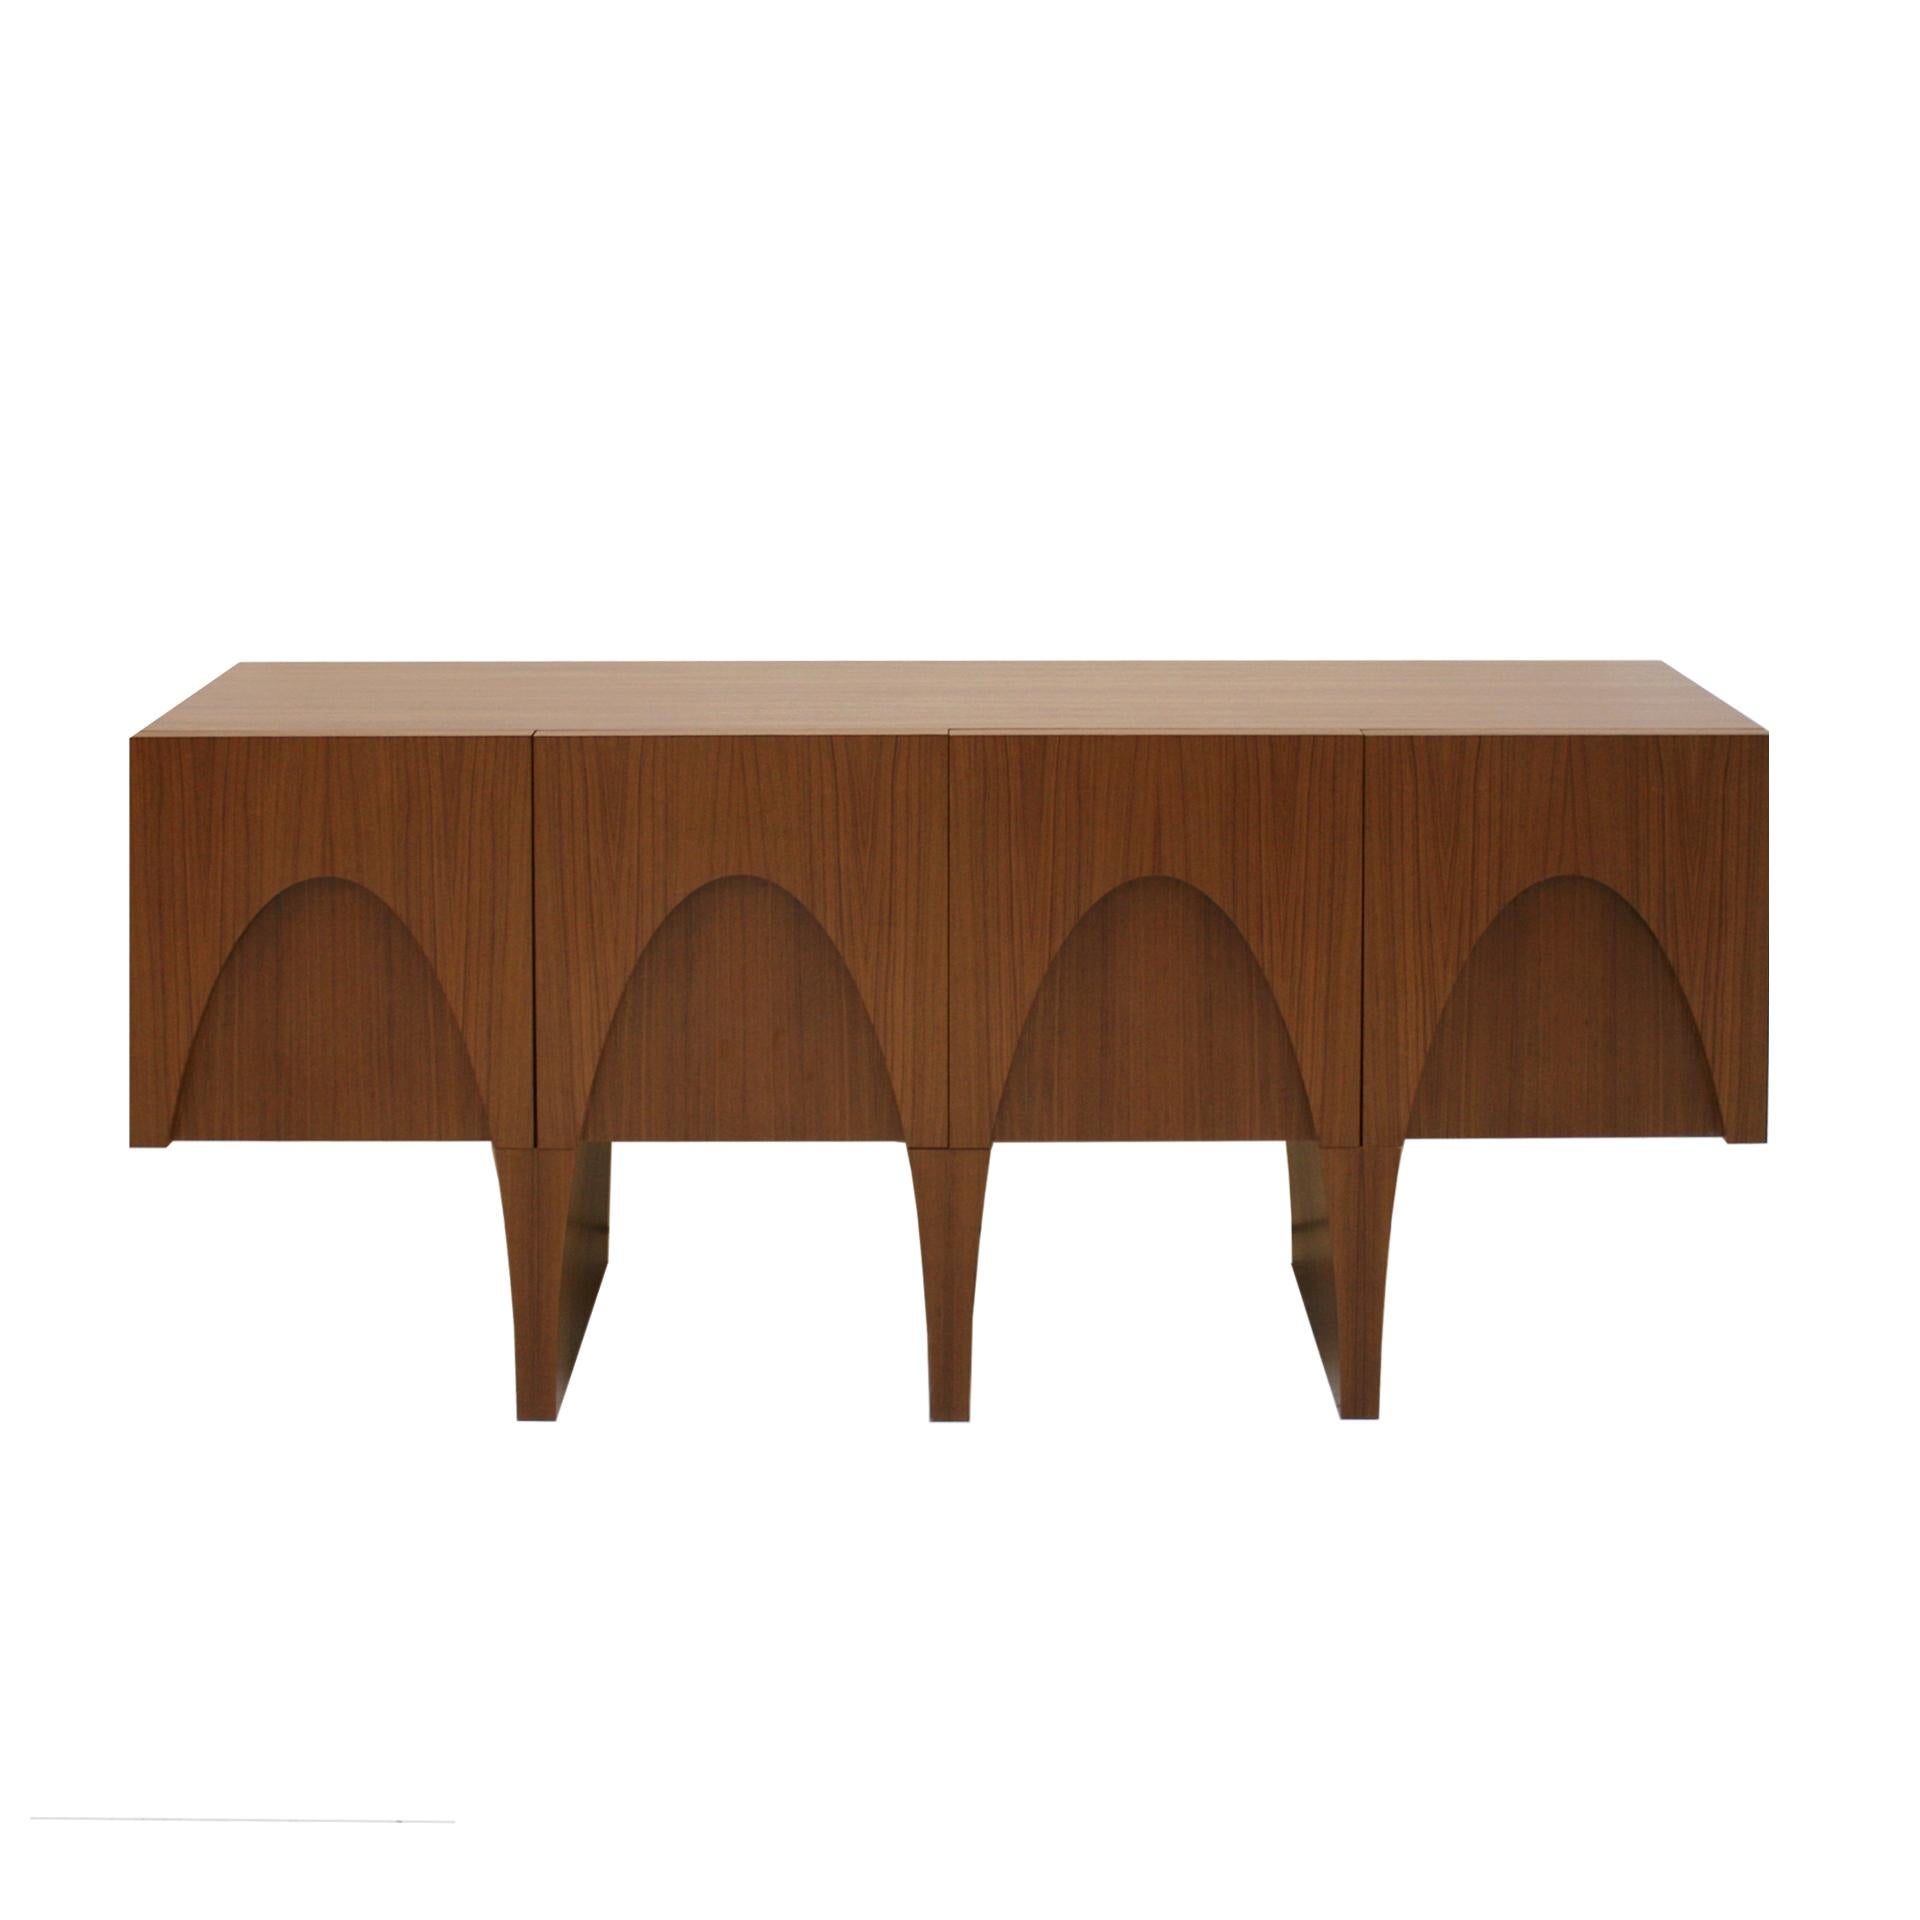 Wooden contemporary sideboard designed by L.A. Studio made of teak wood and interior in lemongrass wood. Composed of three sculptural legs and four folding doors.